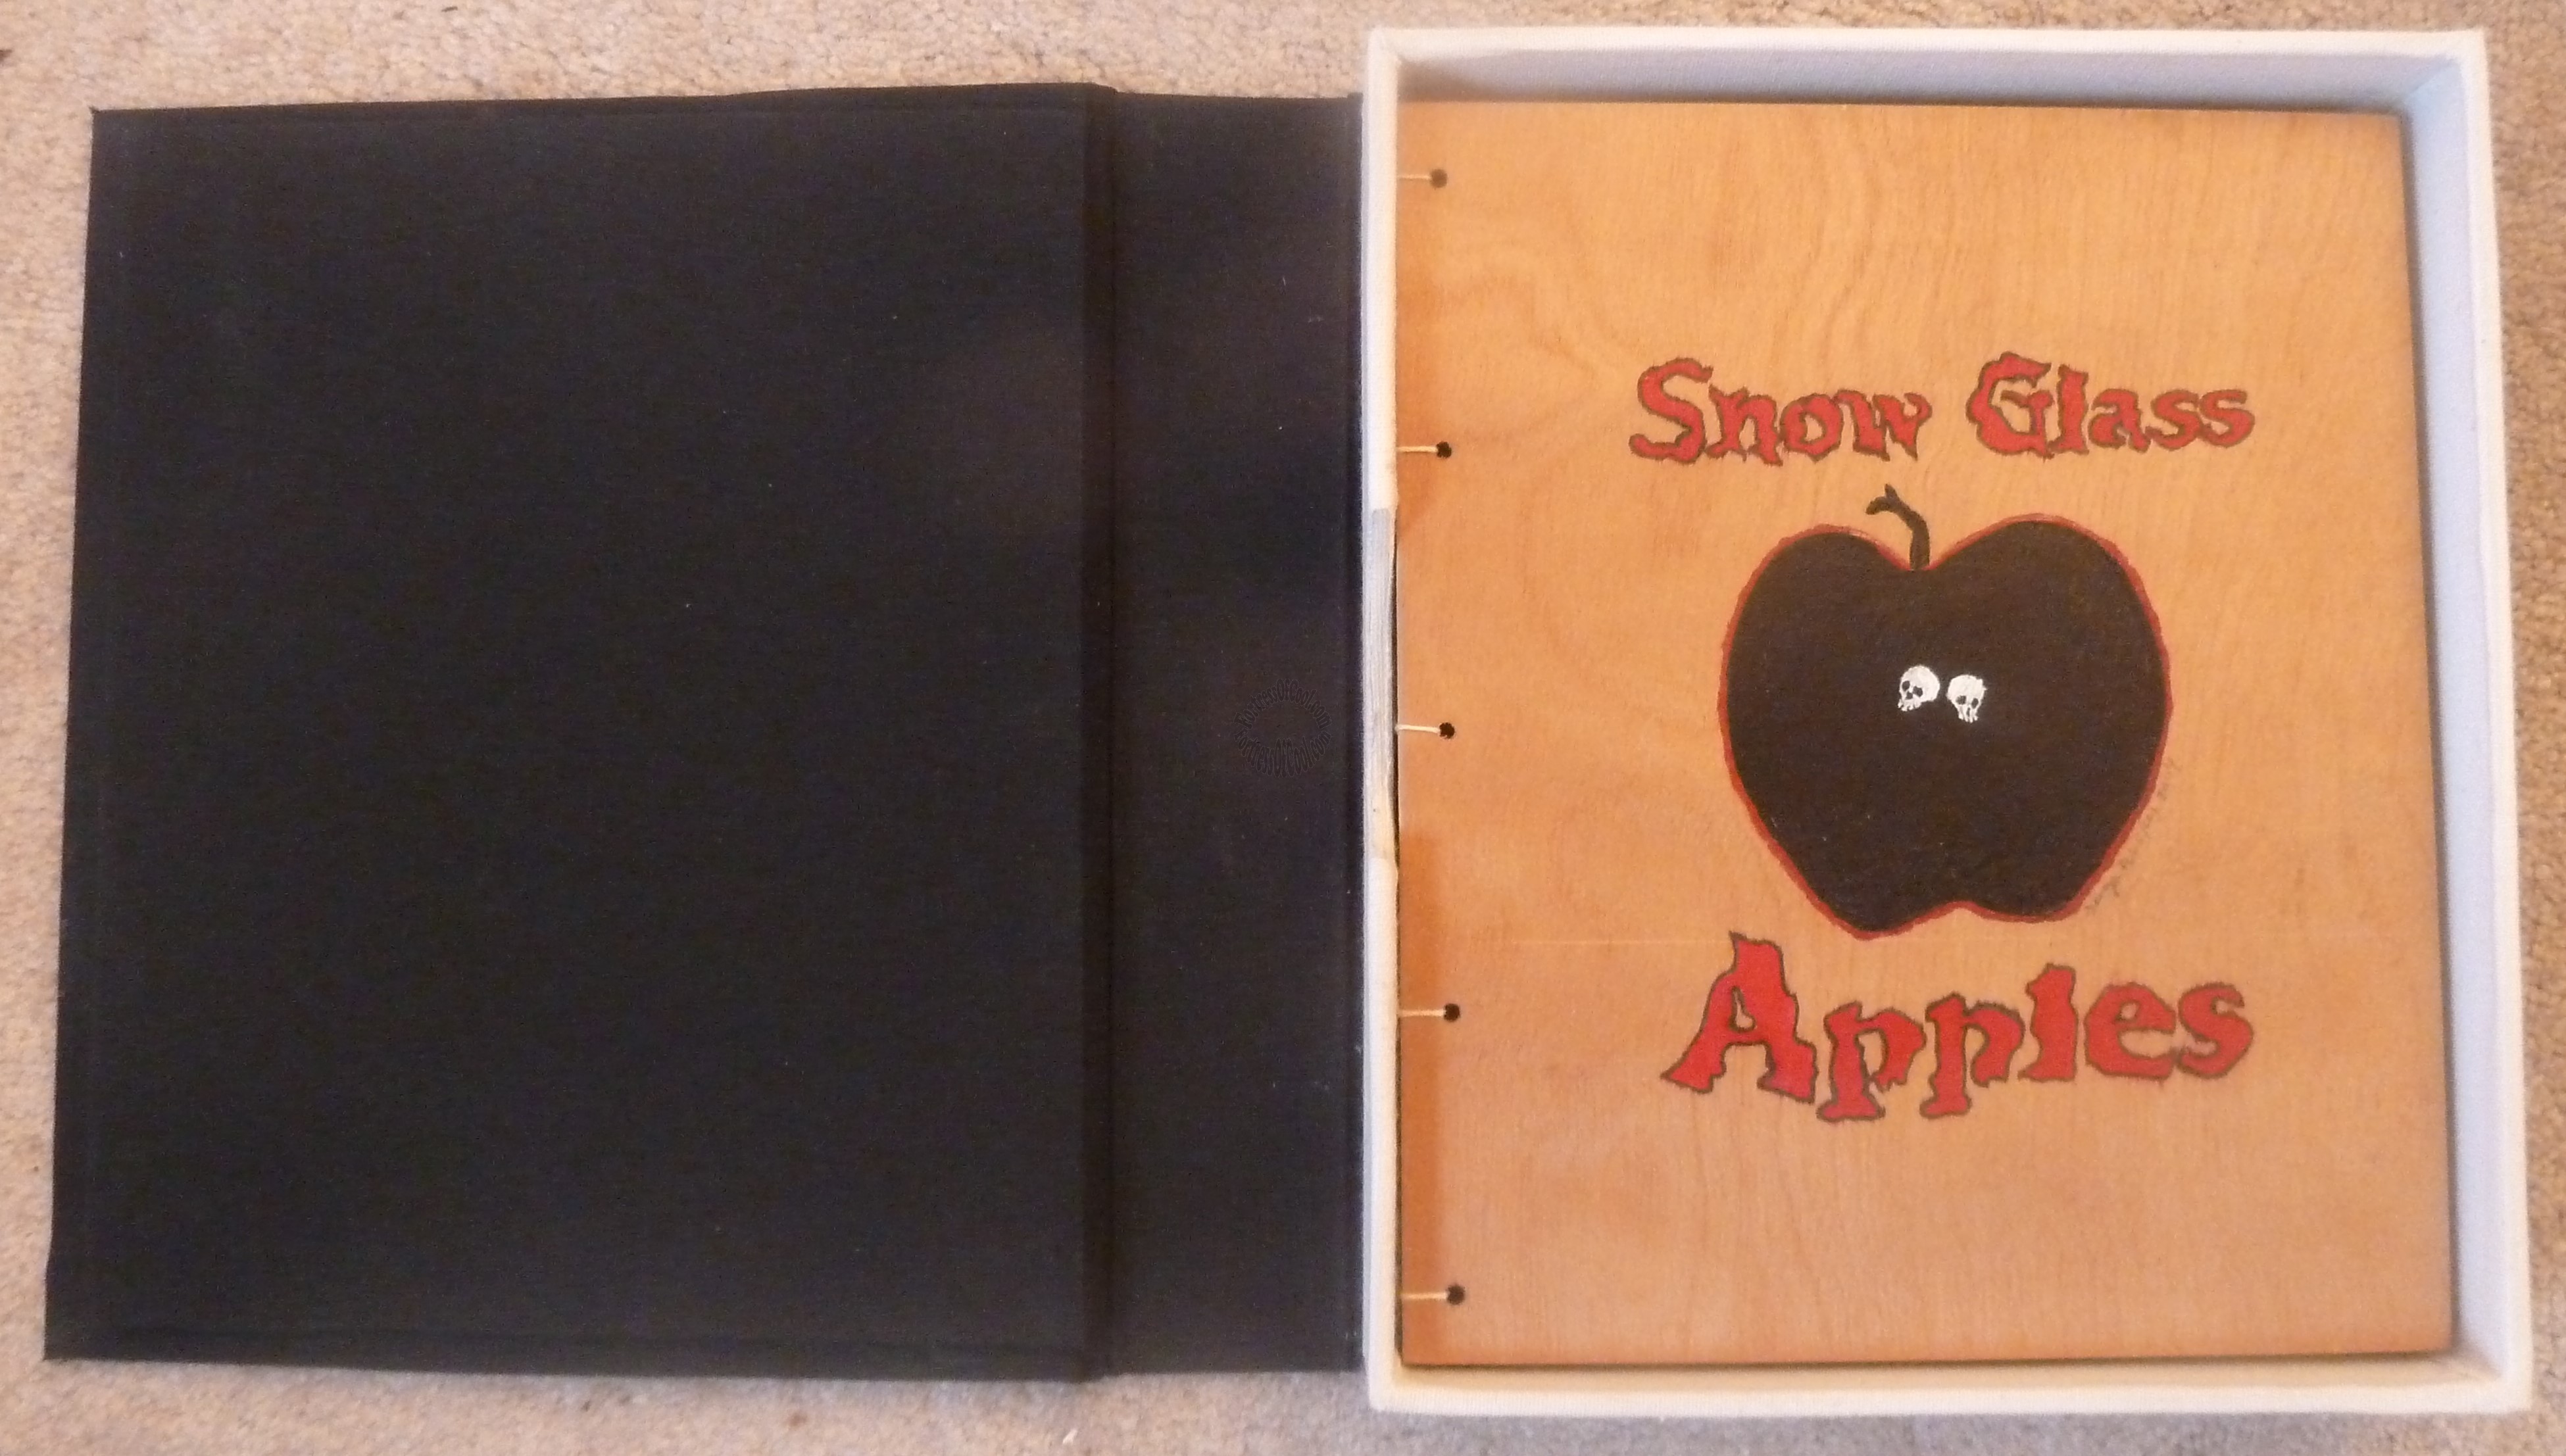 Neil Gaiman - SNOW GLASS APPLES - Artist Proof Copy - with ONE OF A KIND hand painted cover and coptic binding by George A. Walker